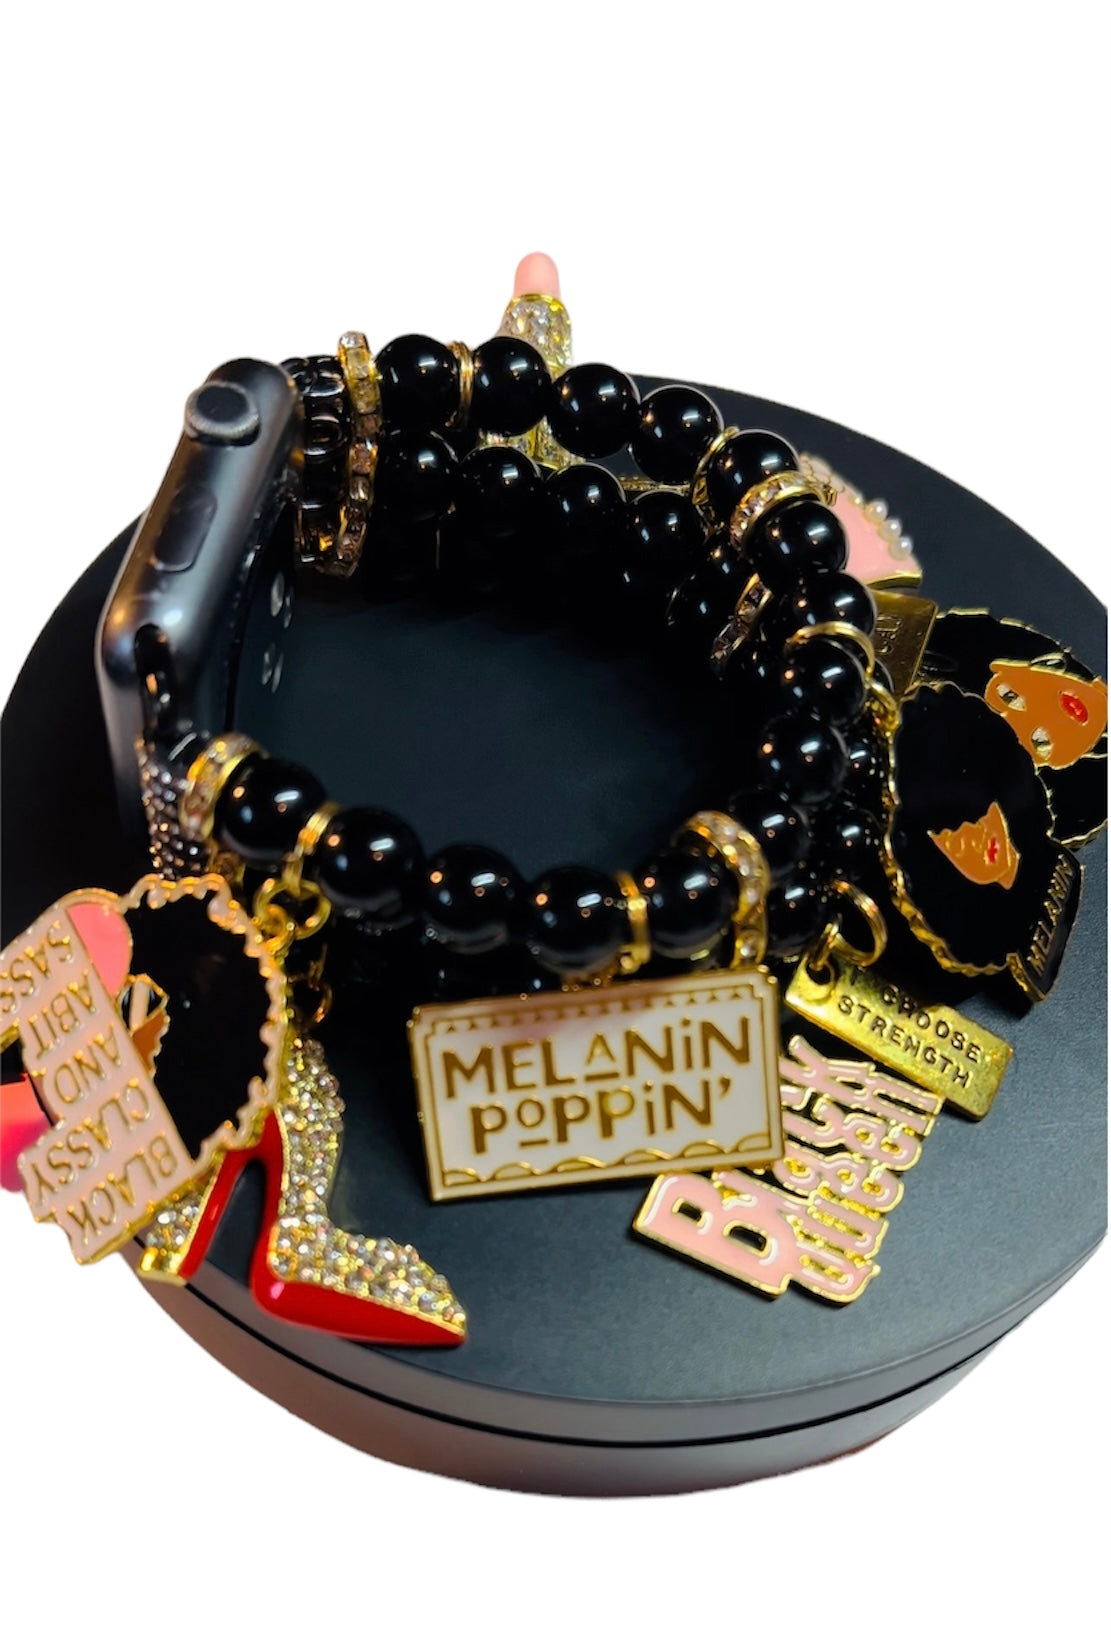 Pre-Order Black Girl Magic Apple Band With Rhinestone Connector-PLEASE READ DESCRIPTION BEFORE ORDERING